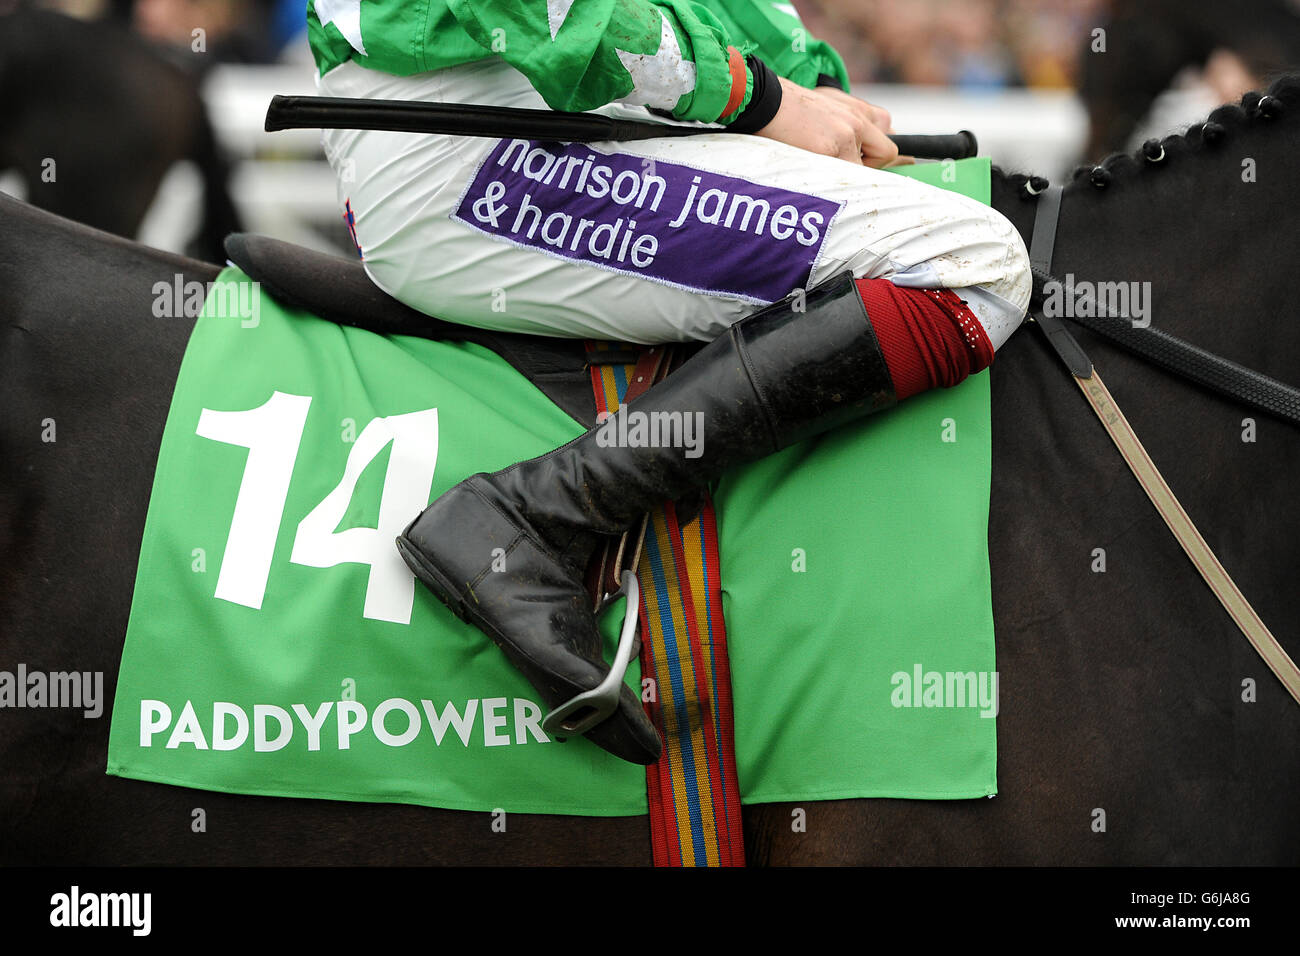 Horse Racing - The Open Festival 2013 - Paddy Power Gold Cup Day - Cheltenham Racecourse. Harrison James and Hardie and Paddypower branding on the saddlecloth of Jockey SamTwiston-Davies on Astracad. Stock Photo